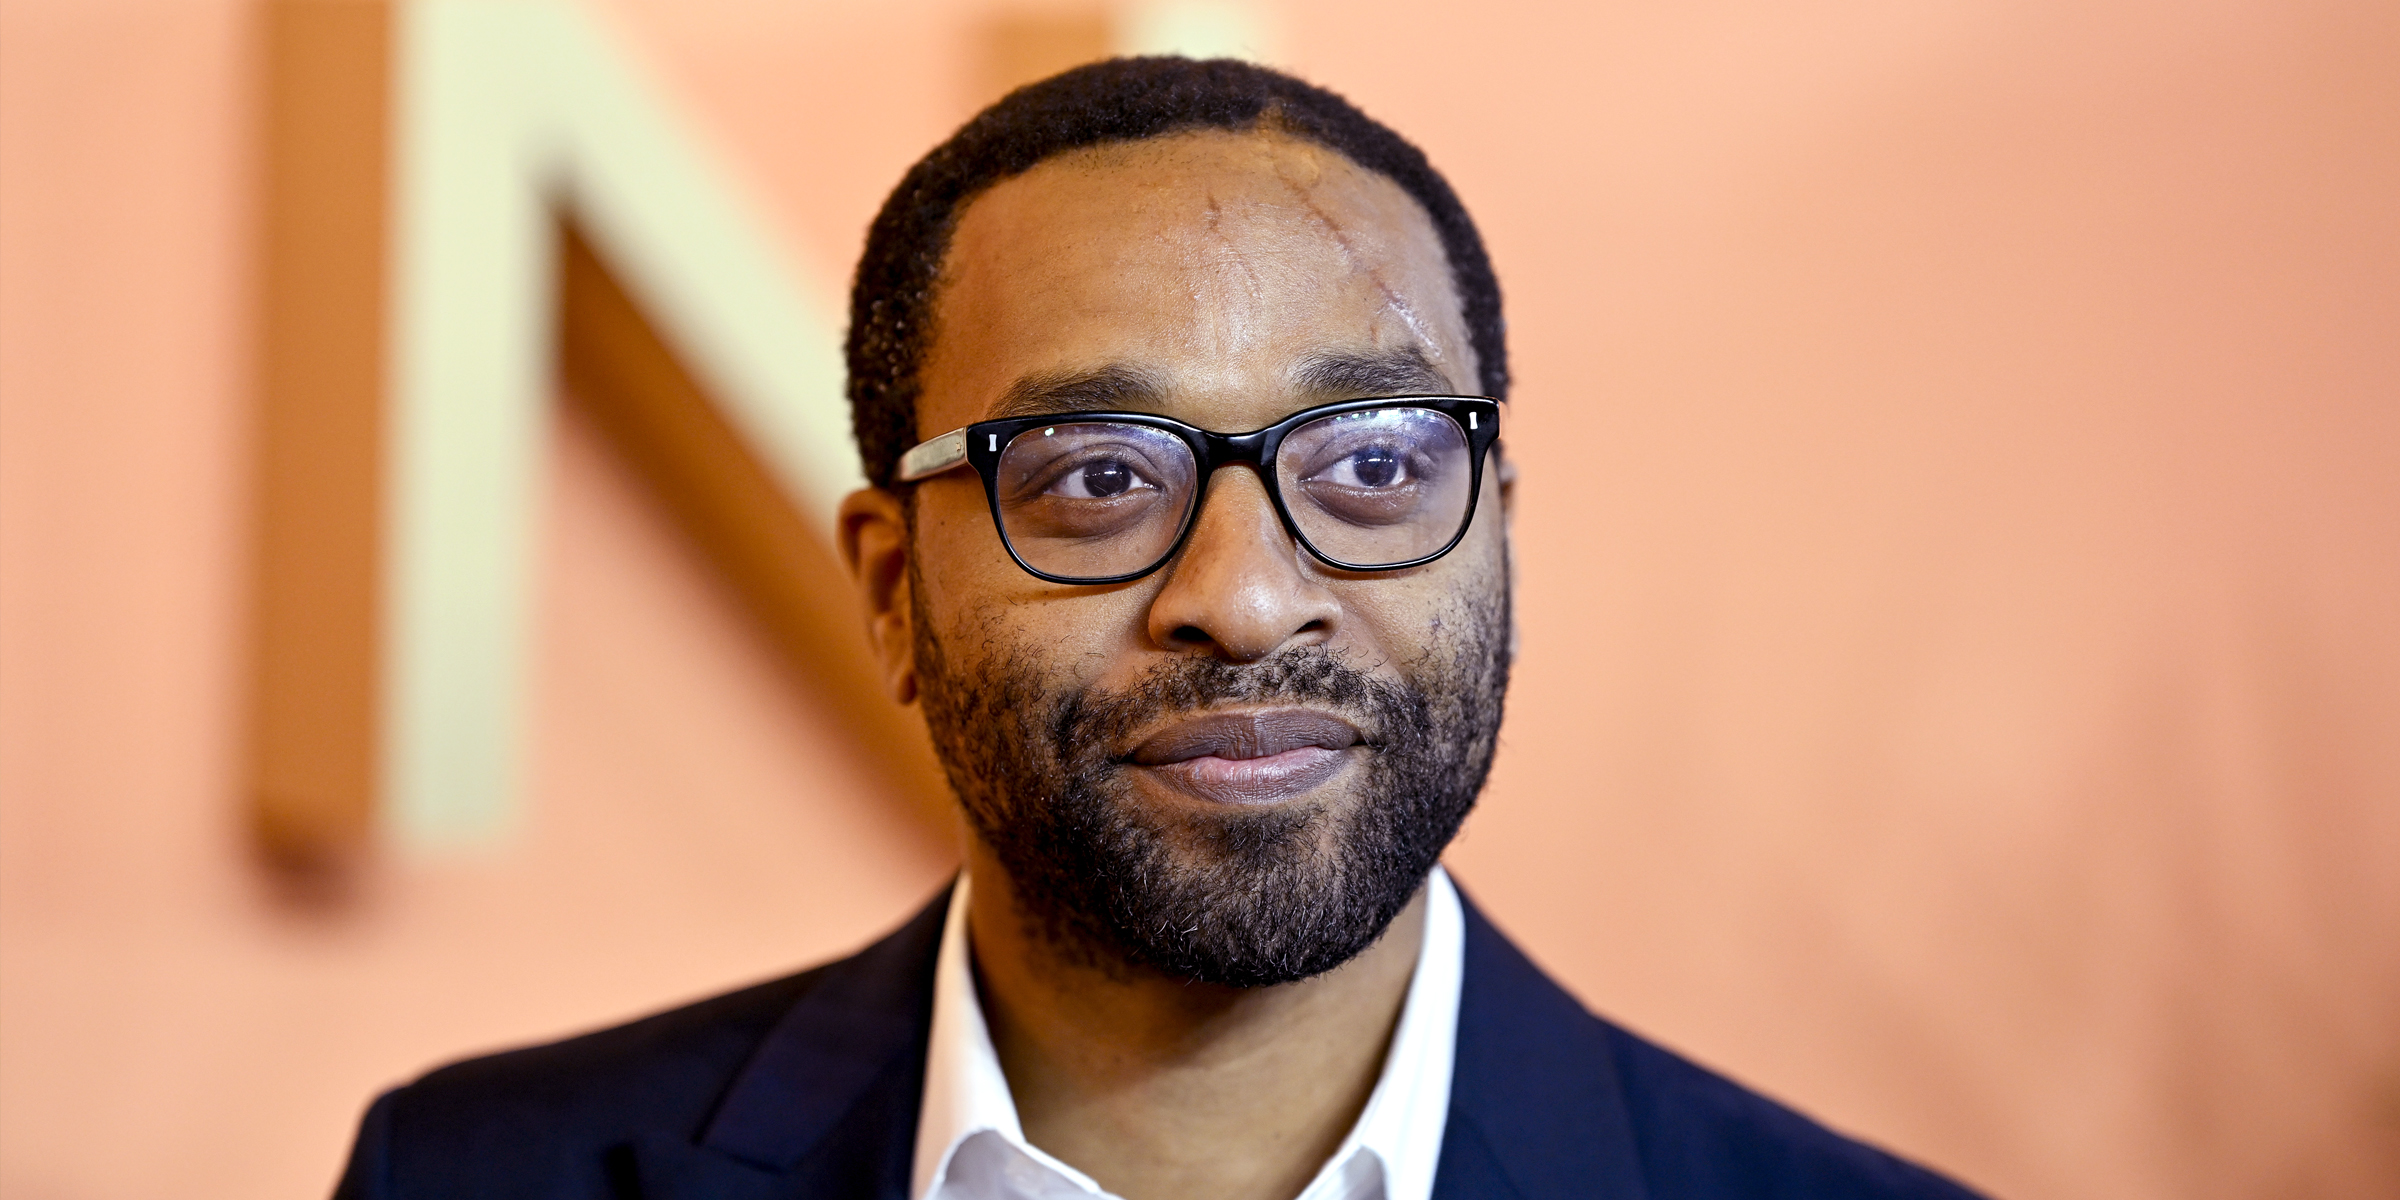 Chiwetel Ejiofor | Source: Getty Images